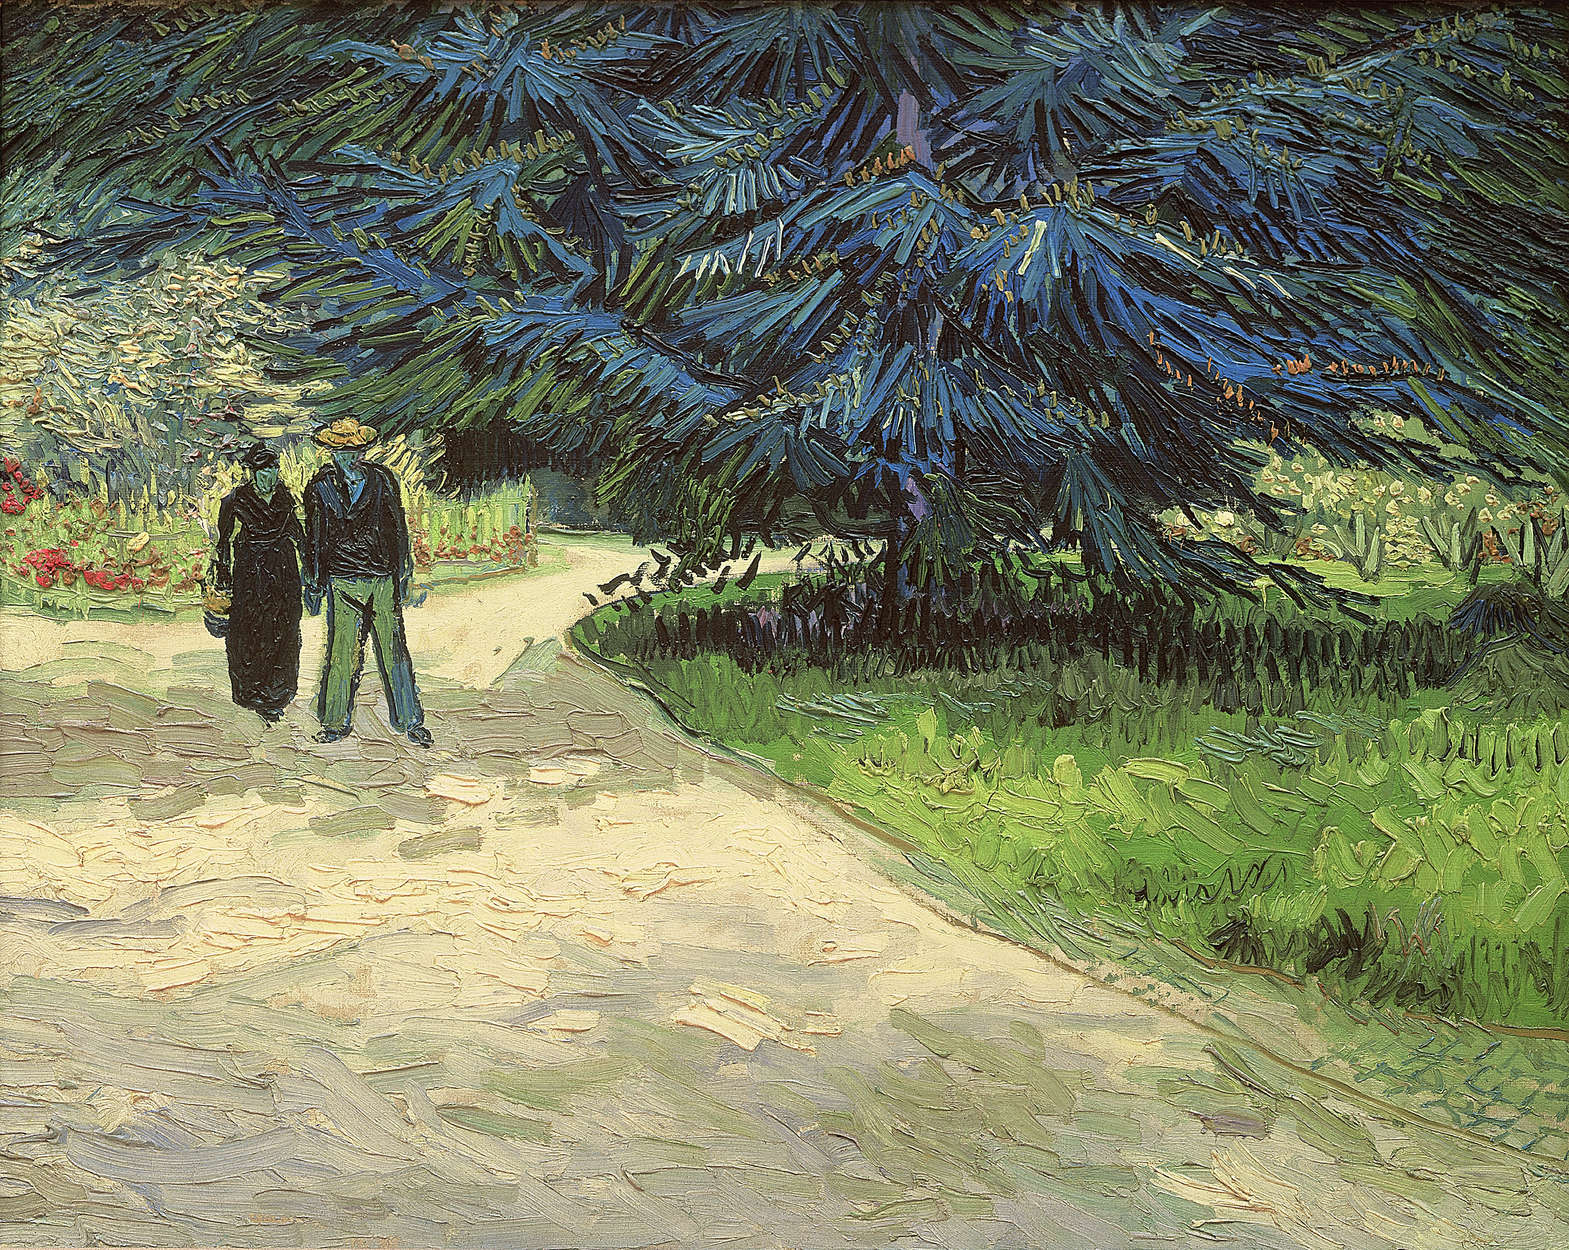             Photo wallpaper "Glade in a park" by Vincent van Gogh
        